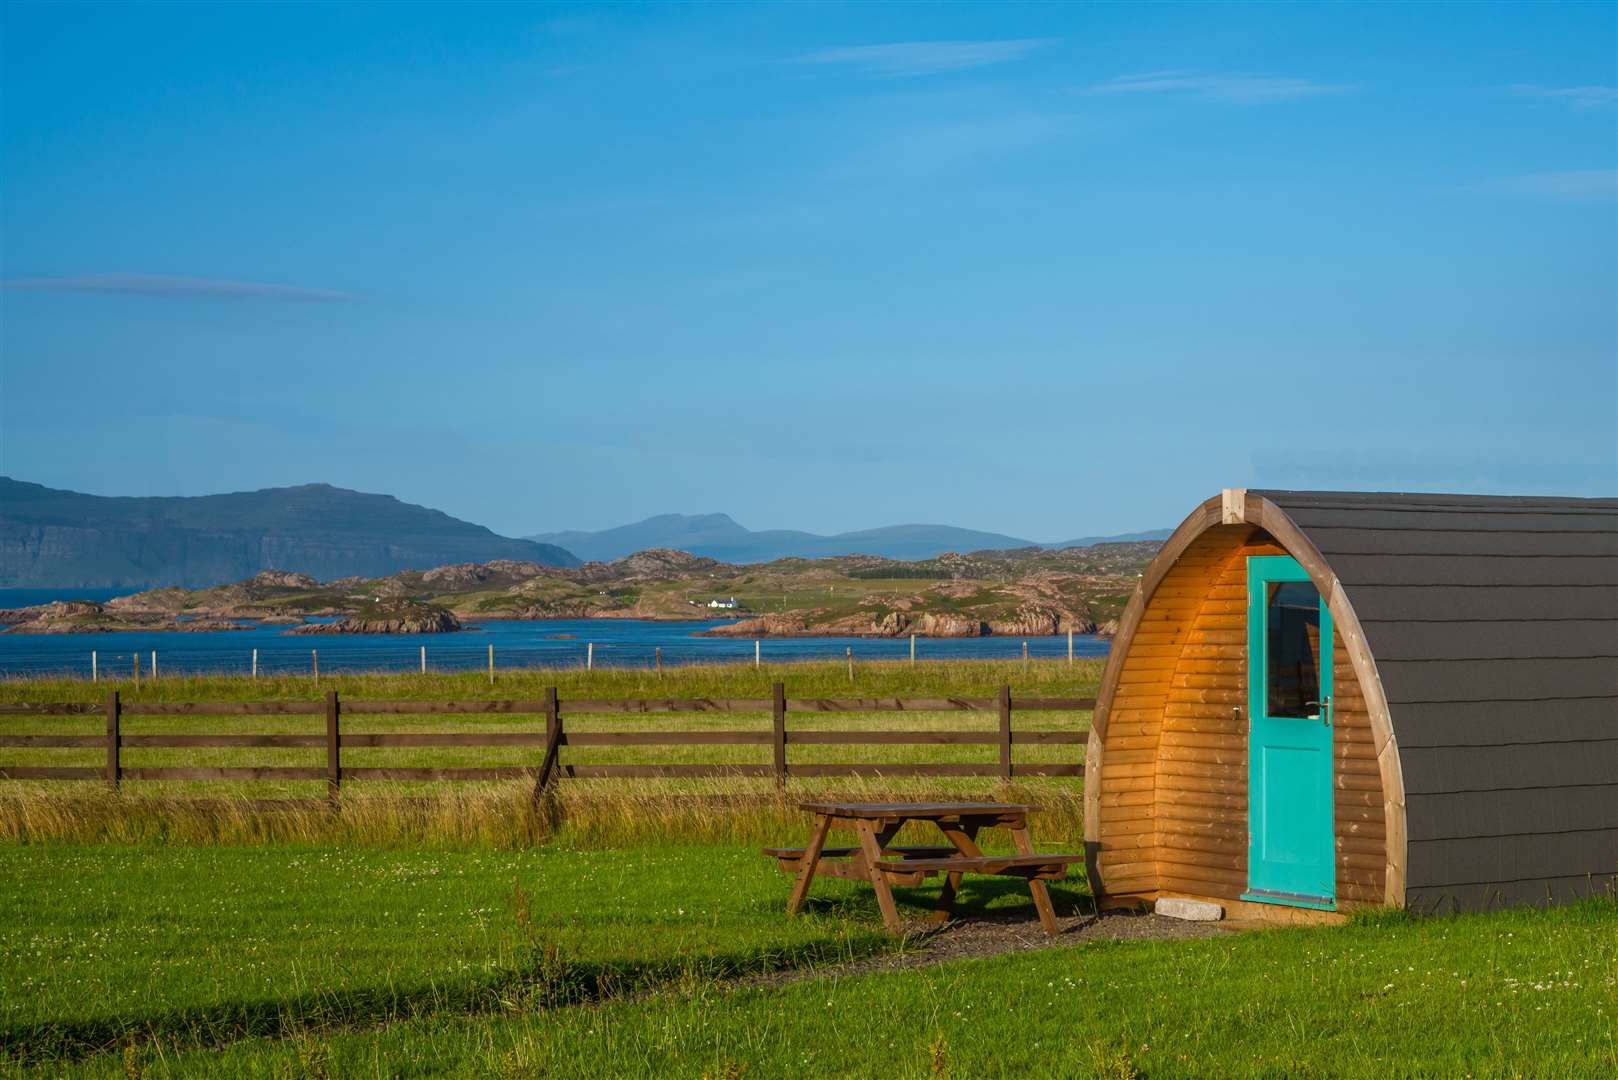 There are fears about the impact on tourism businesses providing facilities such as glamping.